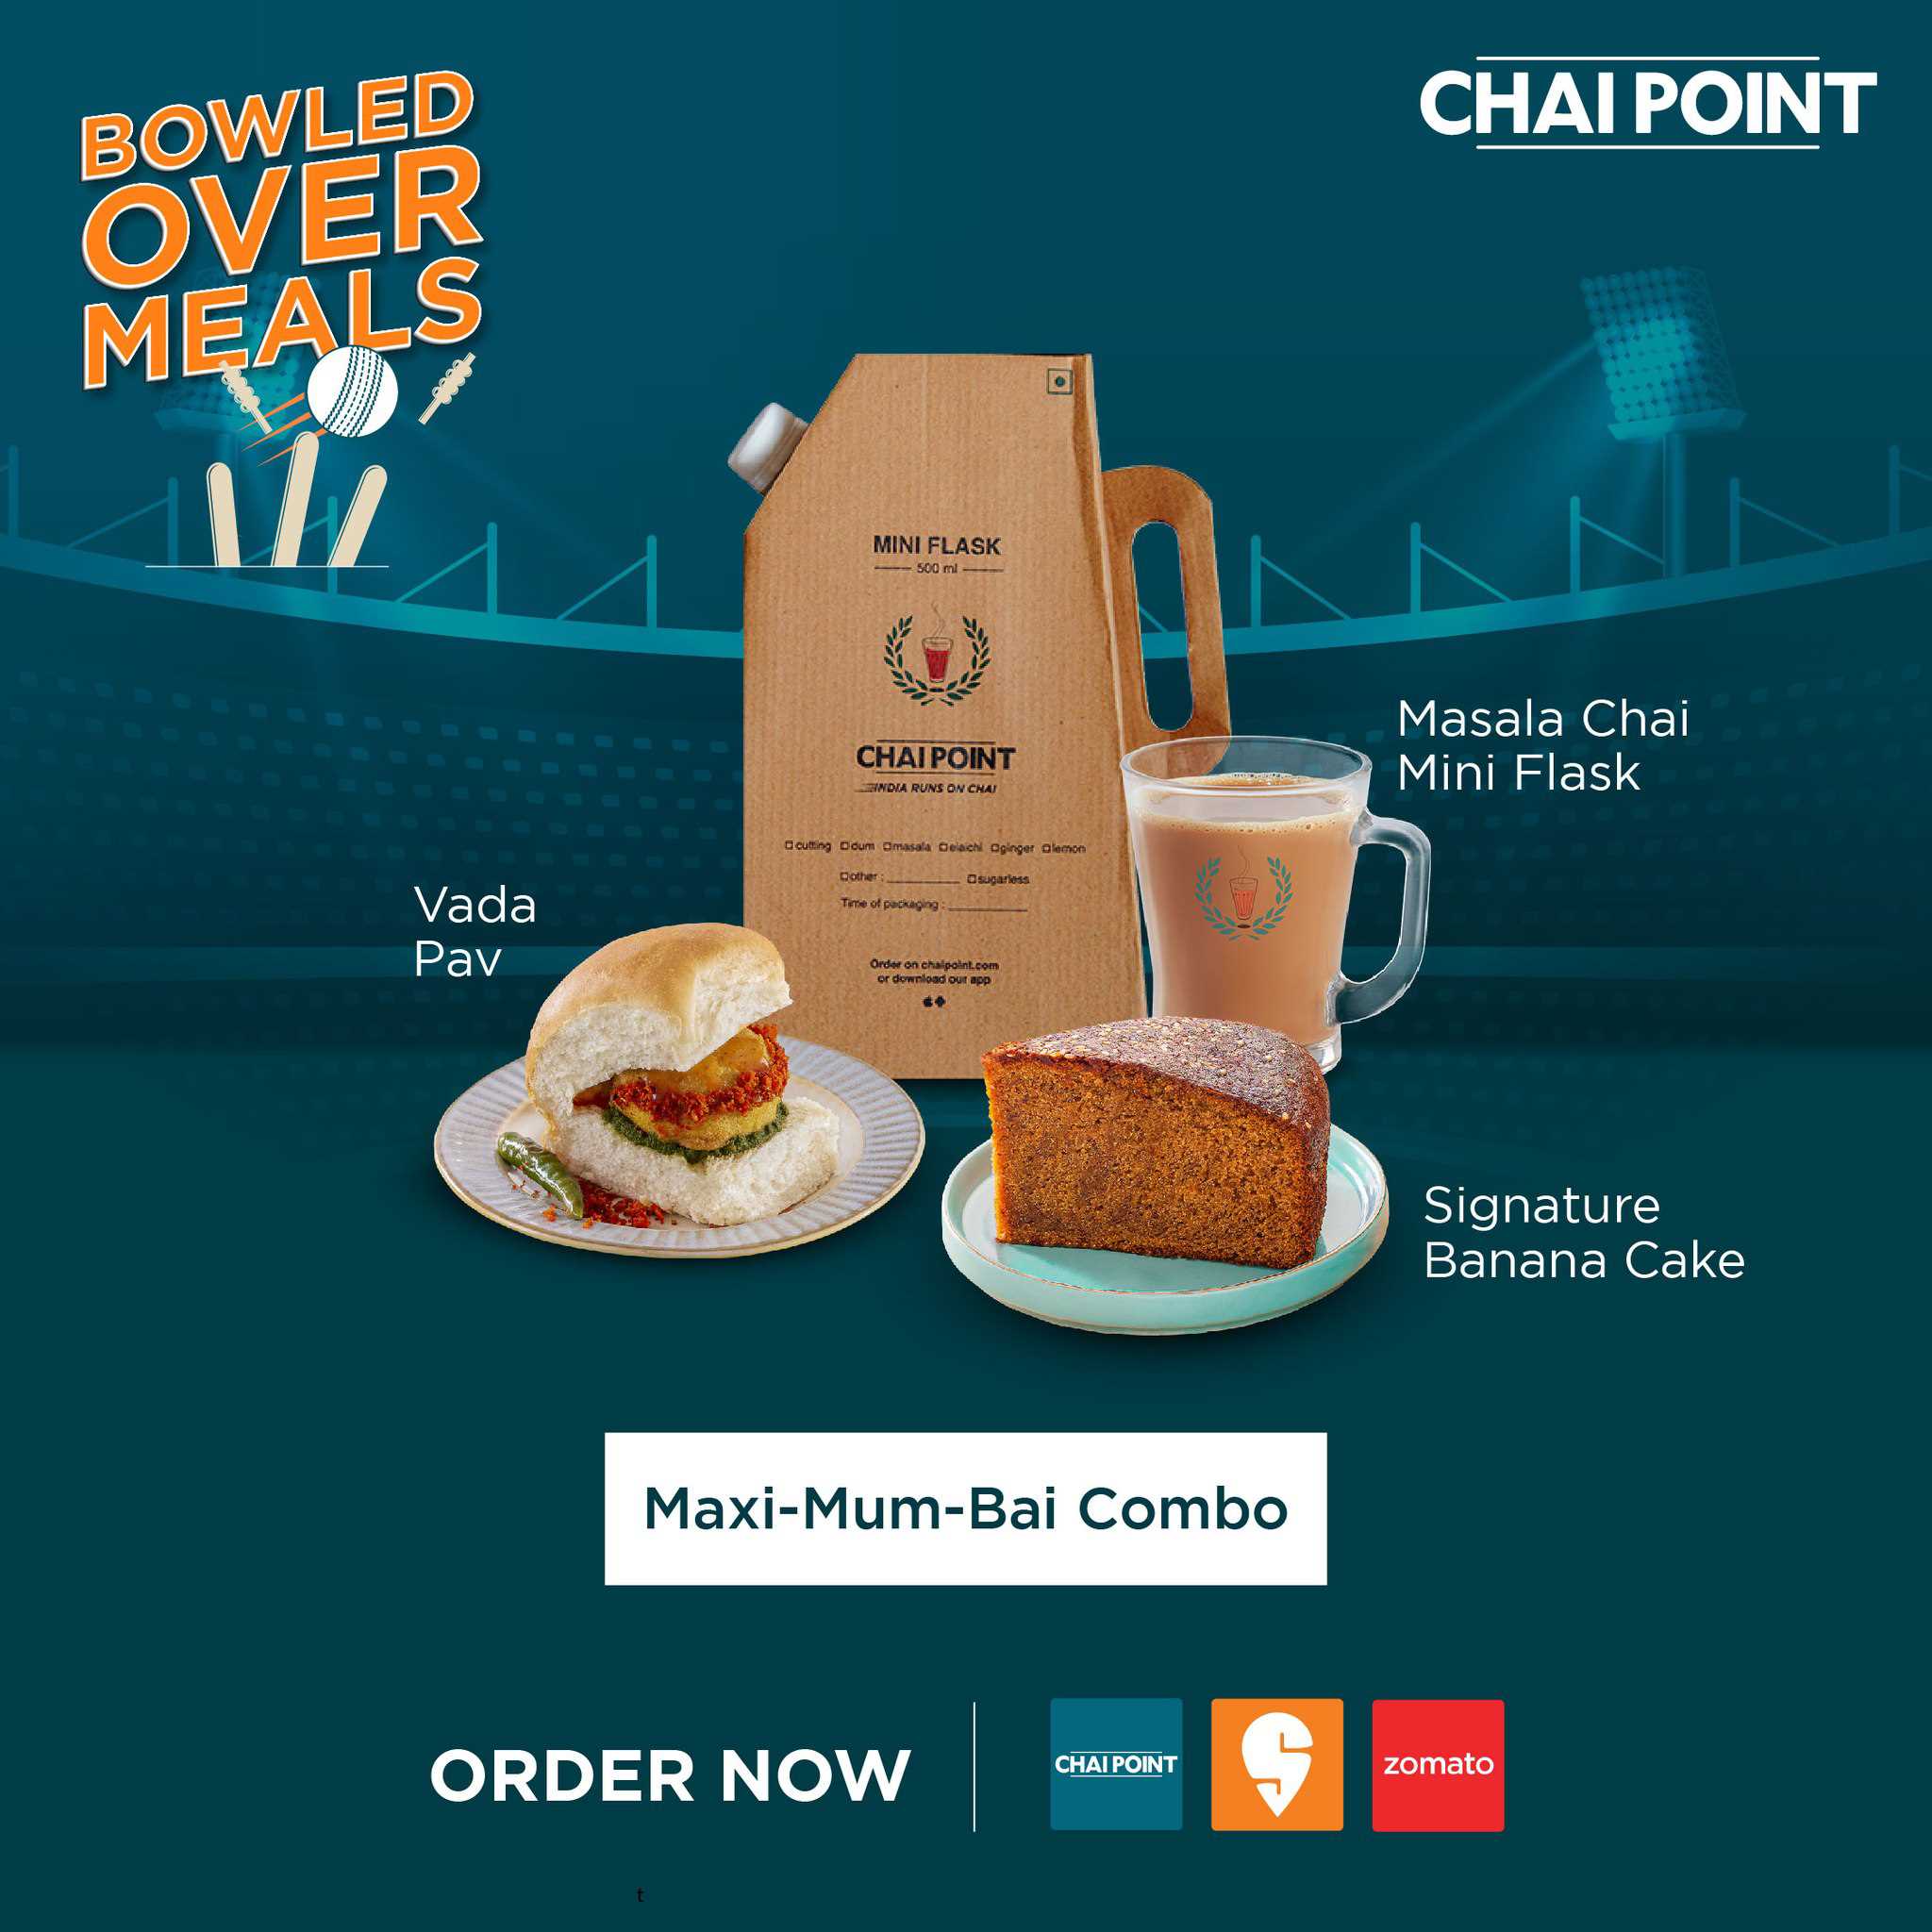 Chai Point - B Block, Connaught Place Cafe - Connaught Place, New Delhi